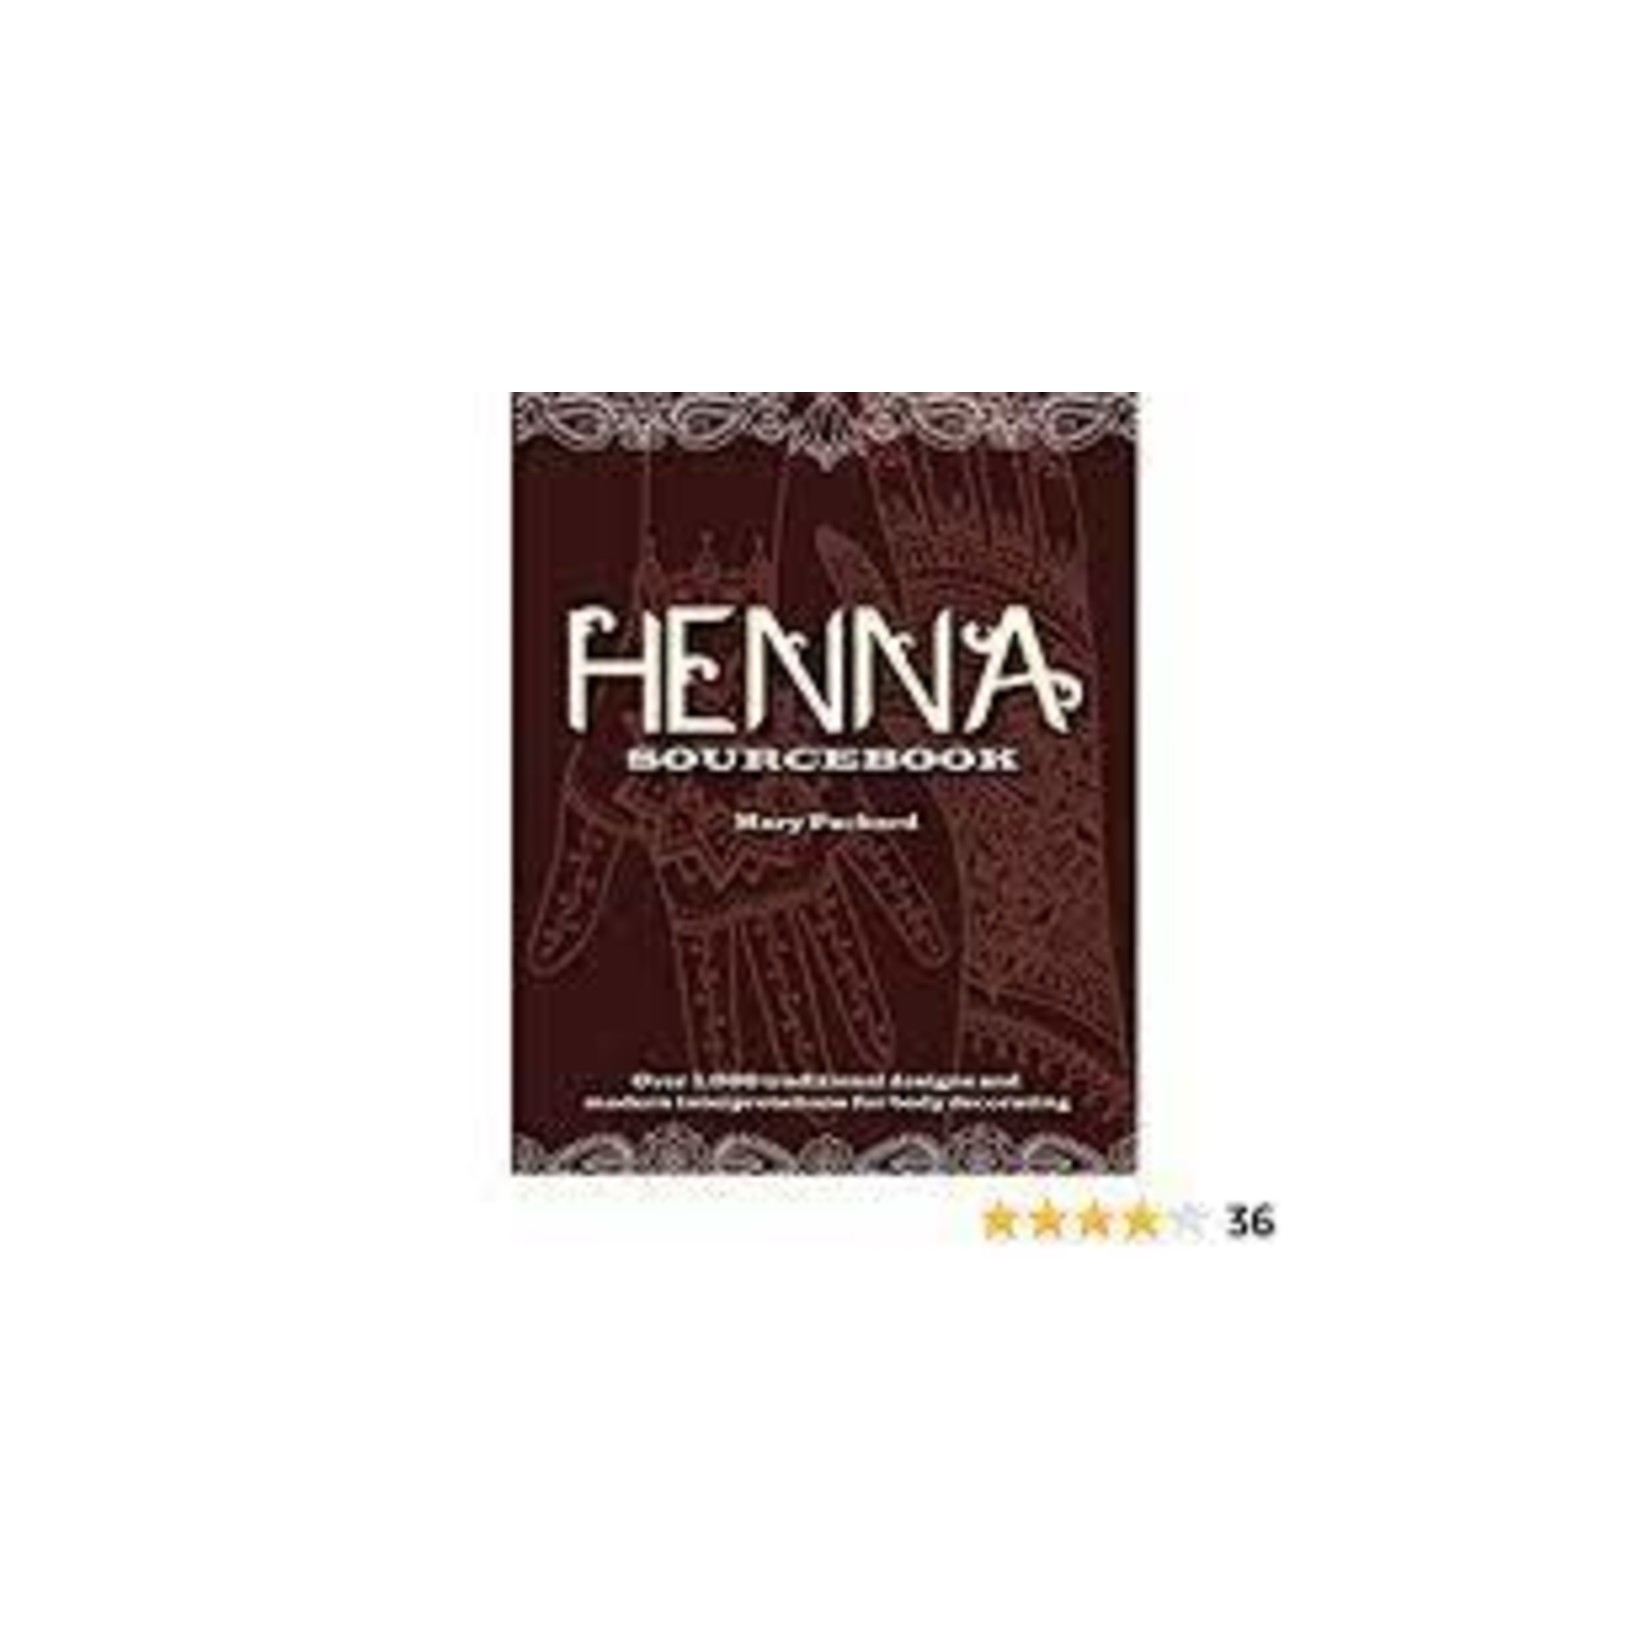 Henna Sourcebook by Mary Packard